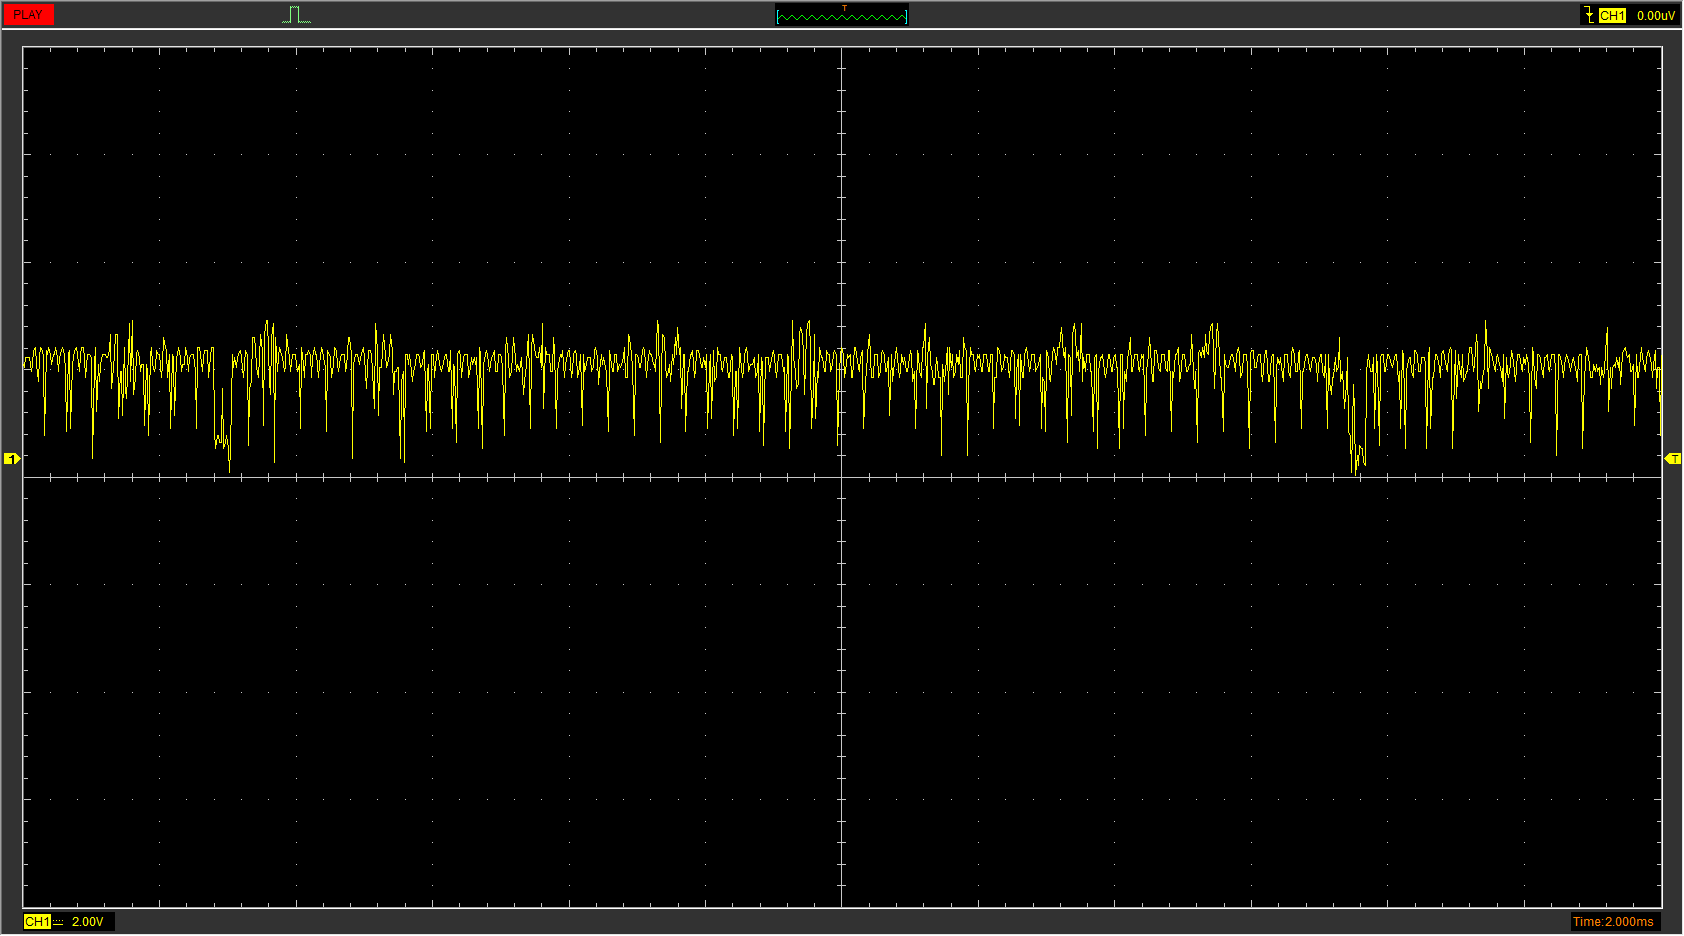 The sync signal from KOF '97. It's very noisy, but pulses are seen in the vertical blank